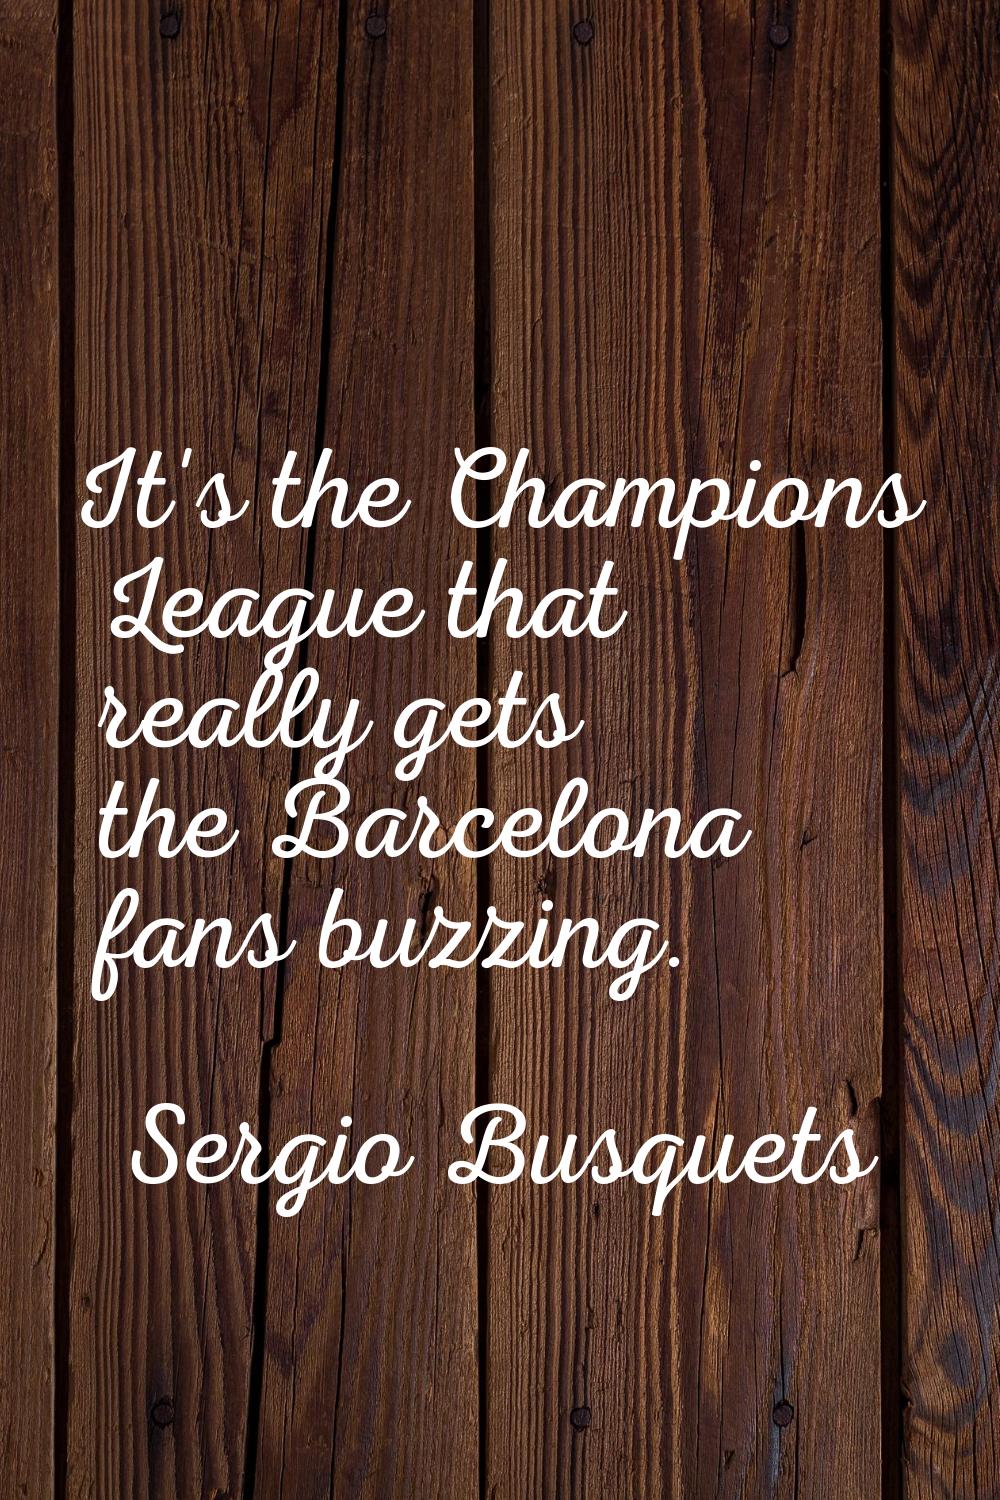 It's the Champions League that really gets the Barcelona fans buzzing.